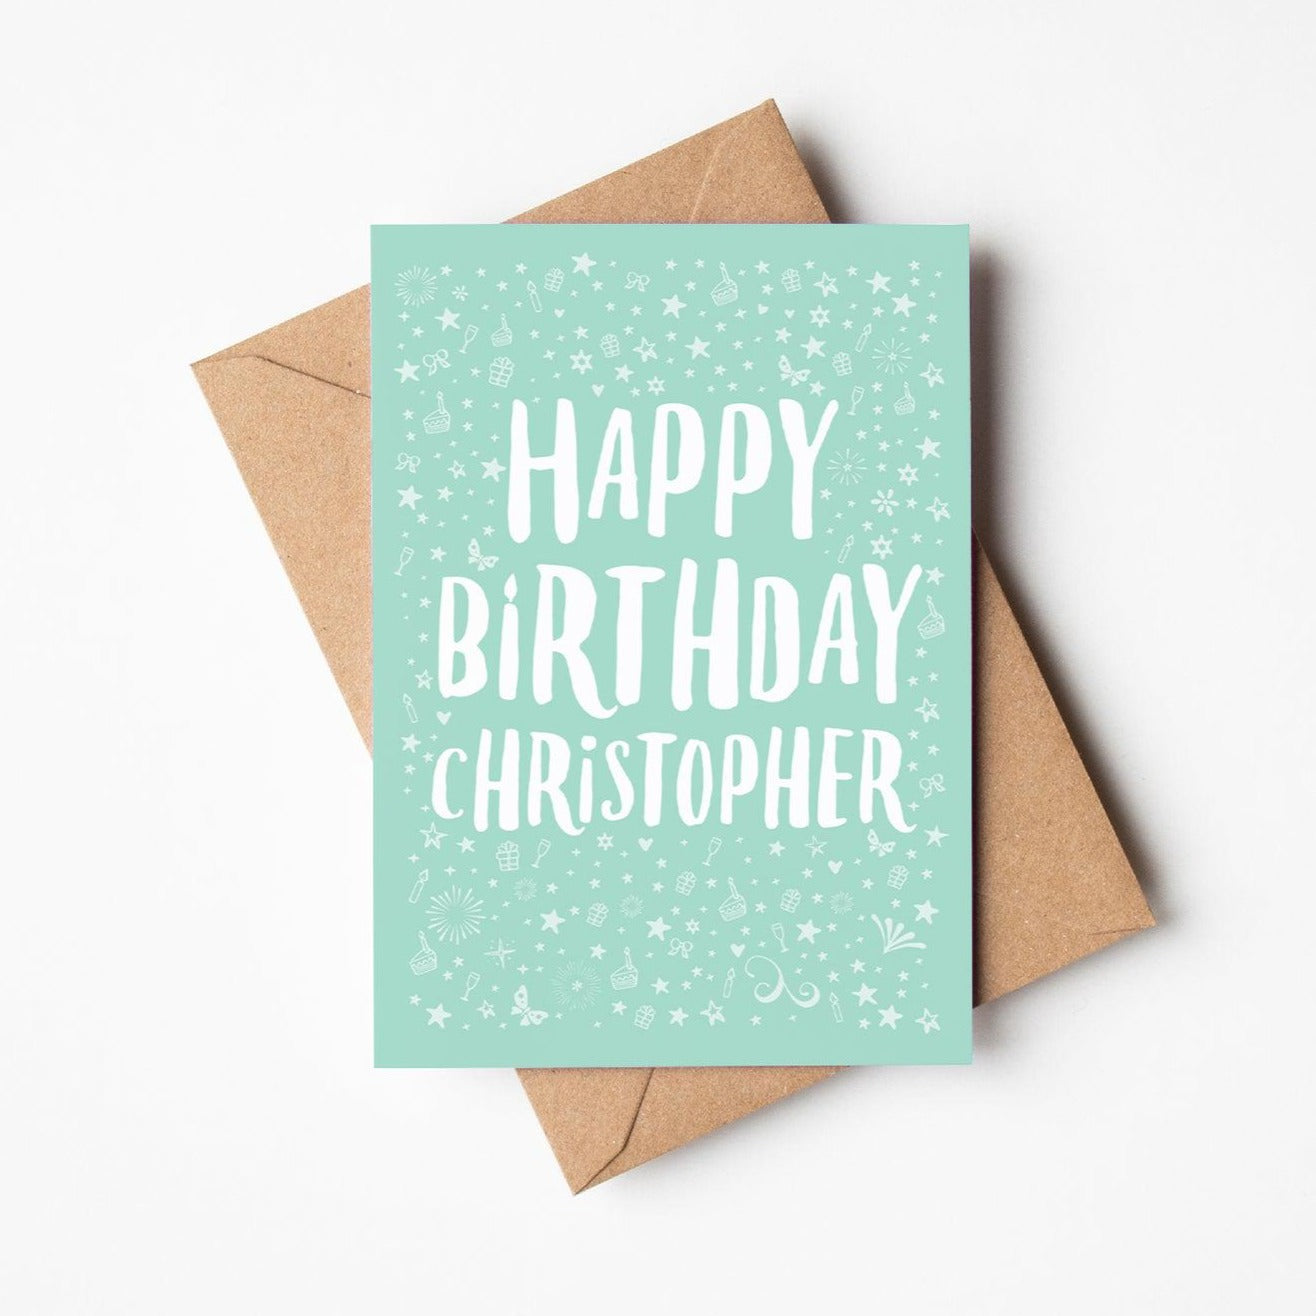 Personalised Happy Birthday Card in teal